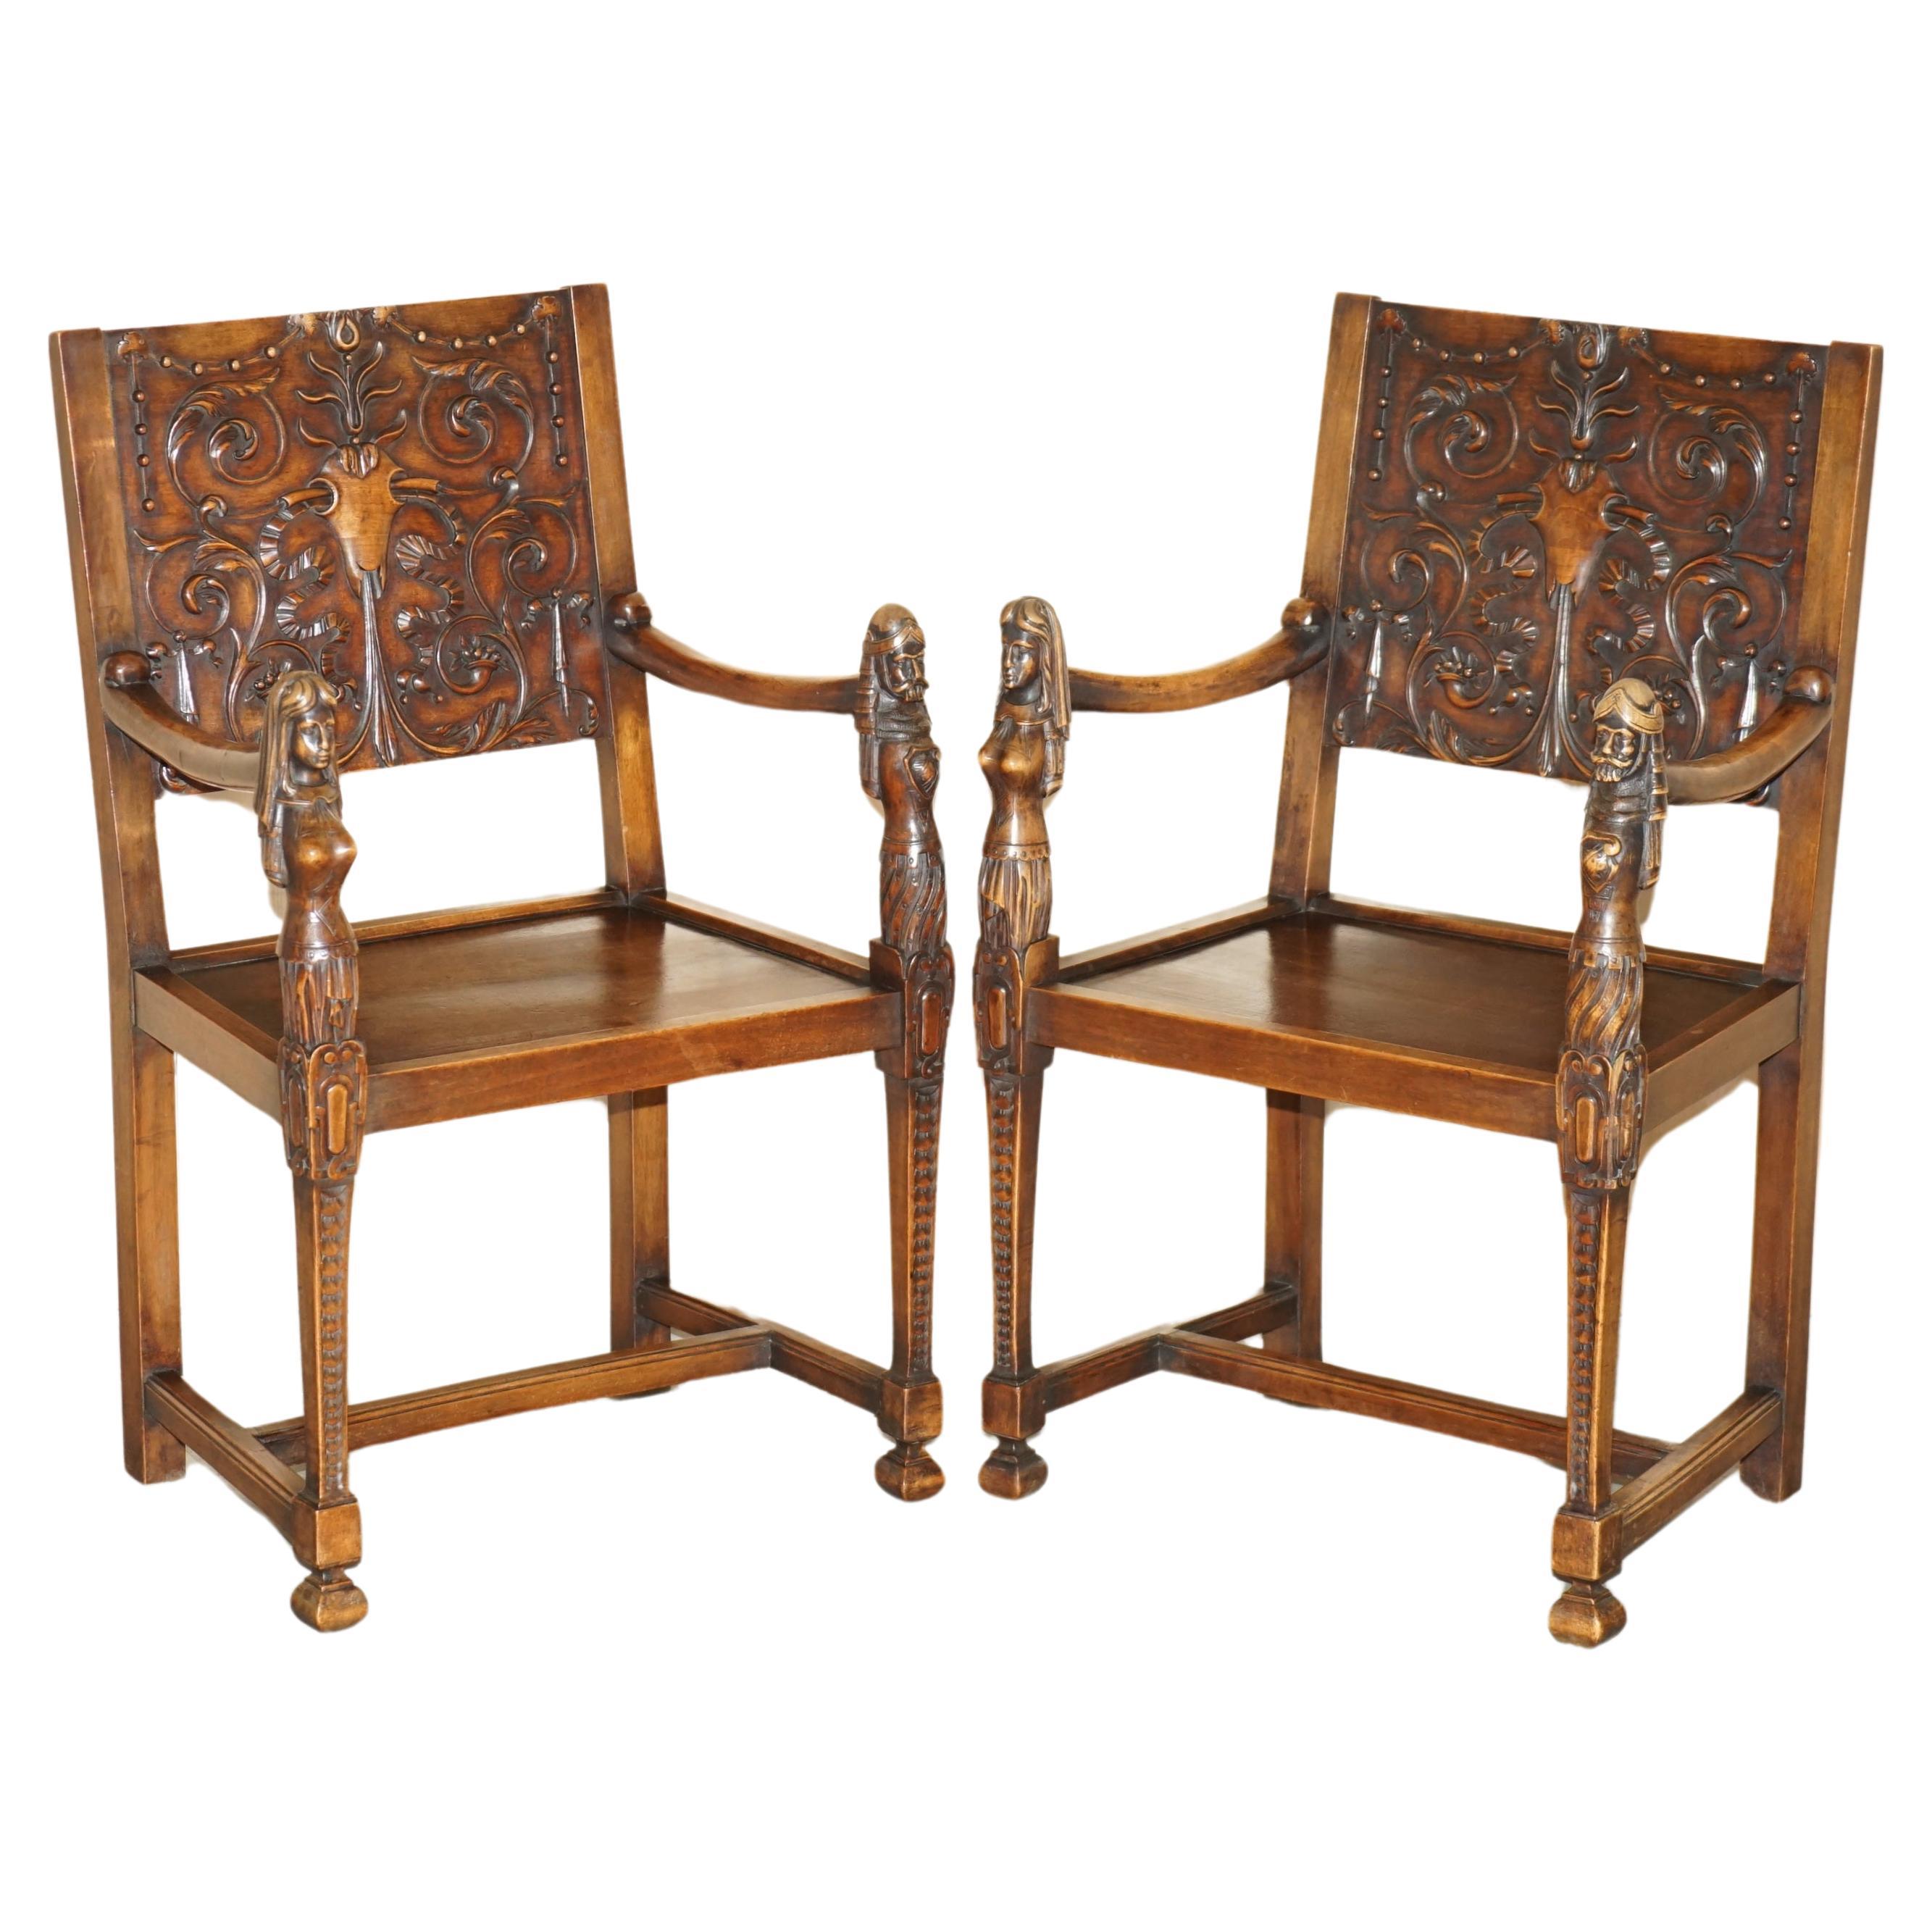 PAIR OF ORNATELY CARVED NEO-GOTHIC SOLiD WALNUT 19TH CENTURY CEREMONY ARMCHAIRS For Sale